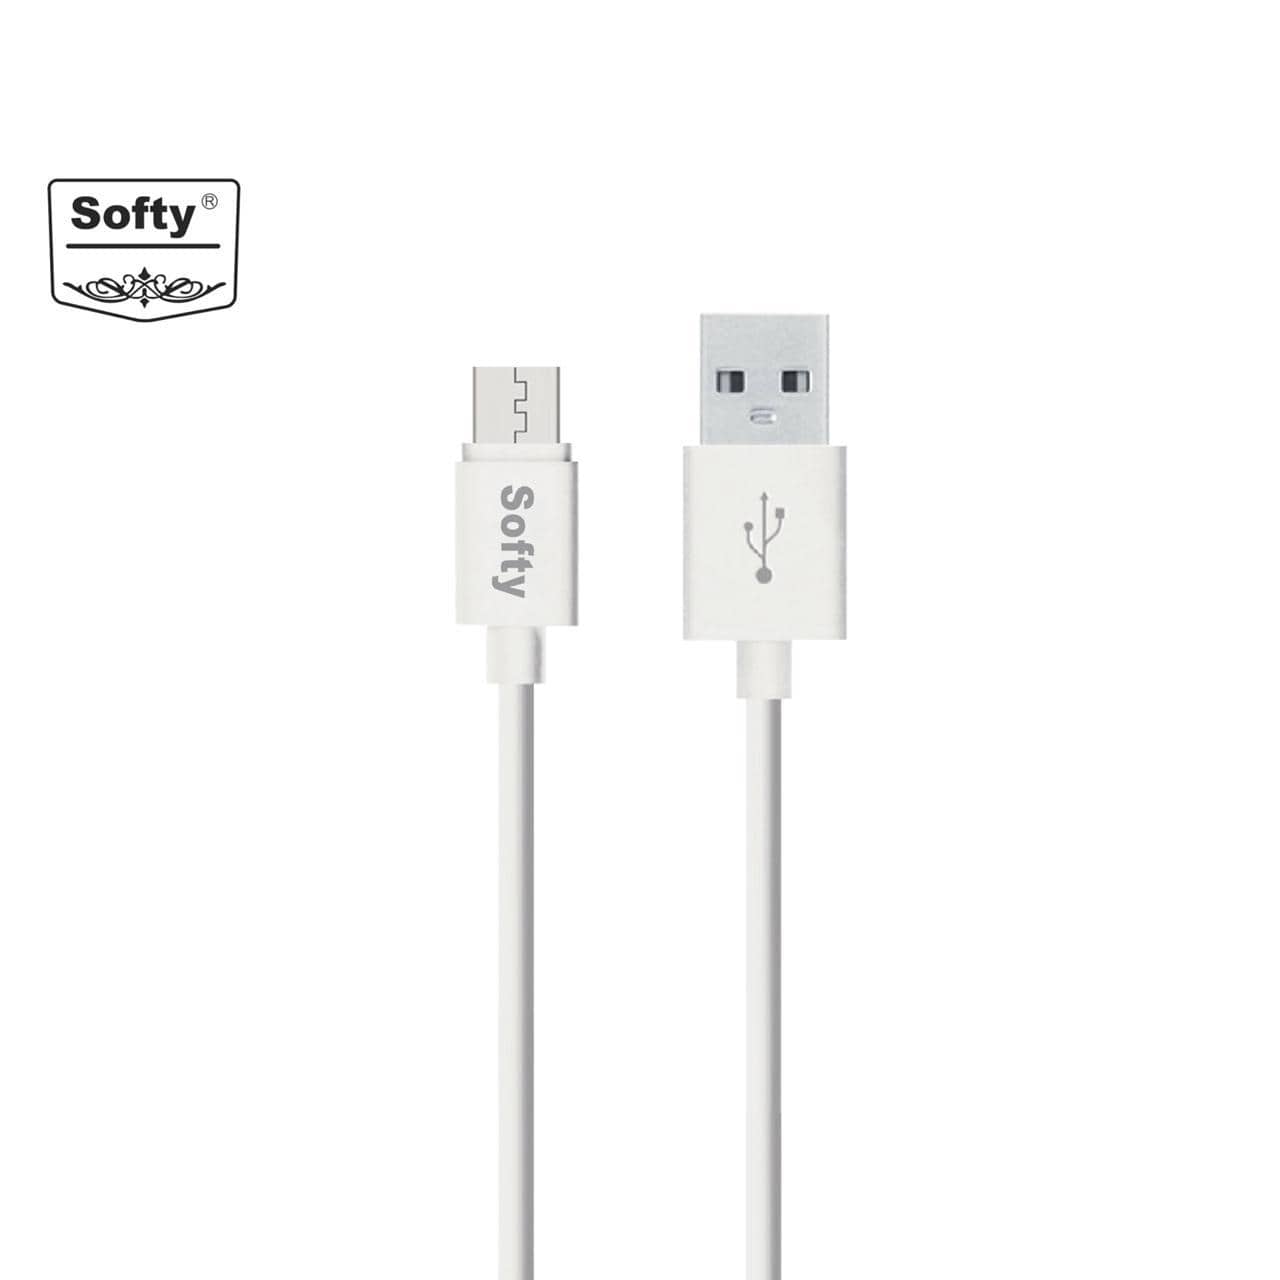 Softy premium quality Micro usb cable 1.5M-USB Cable-dealsplant